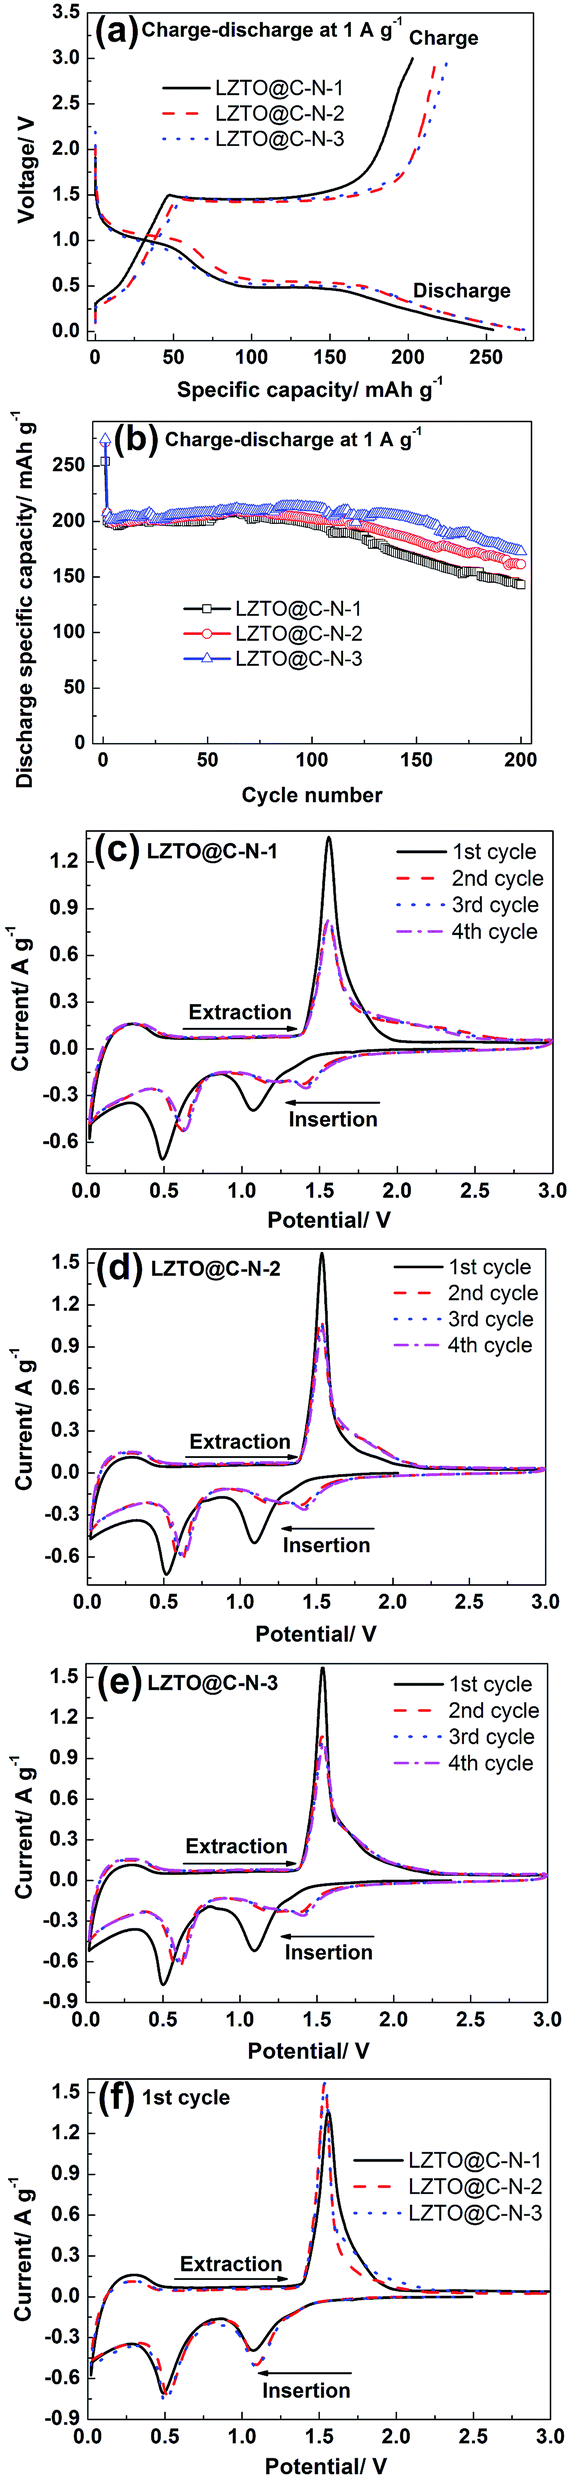 Synthesis Of High Rate Capability N Doped Carbon Coated On Lithium Zinc Titanate Via A Surfactant Assisted Solid State Route Rsc Advances Rsc Publishing Doi 10 1039 C7rae